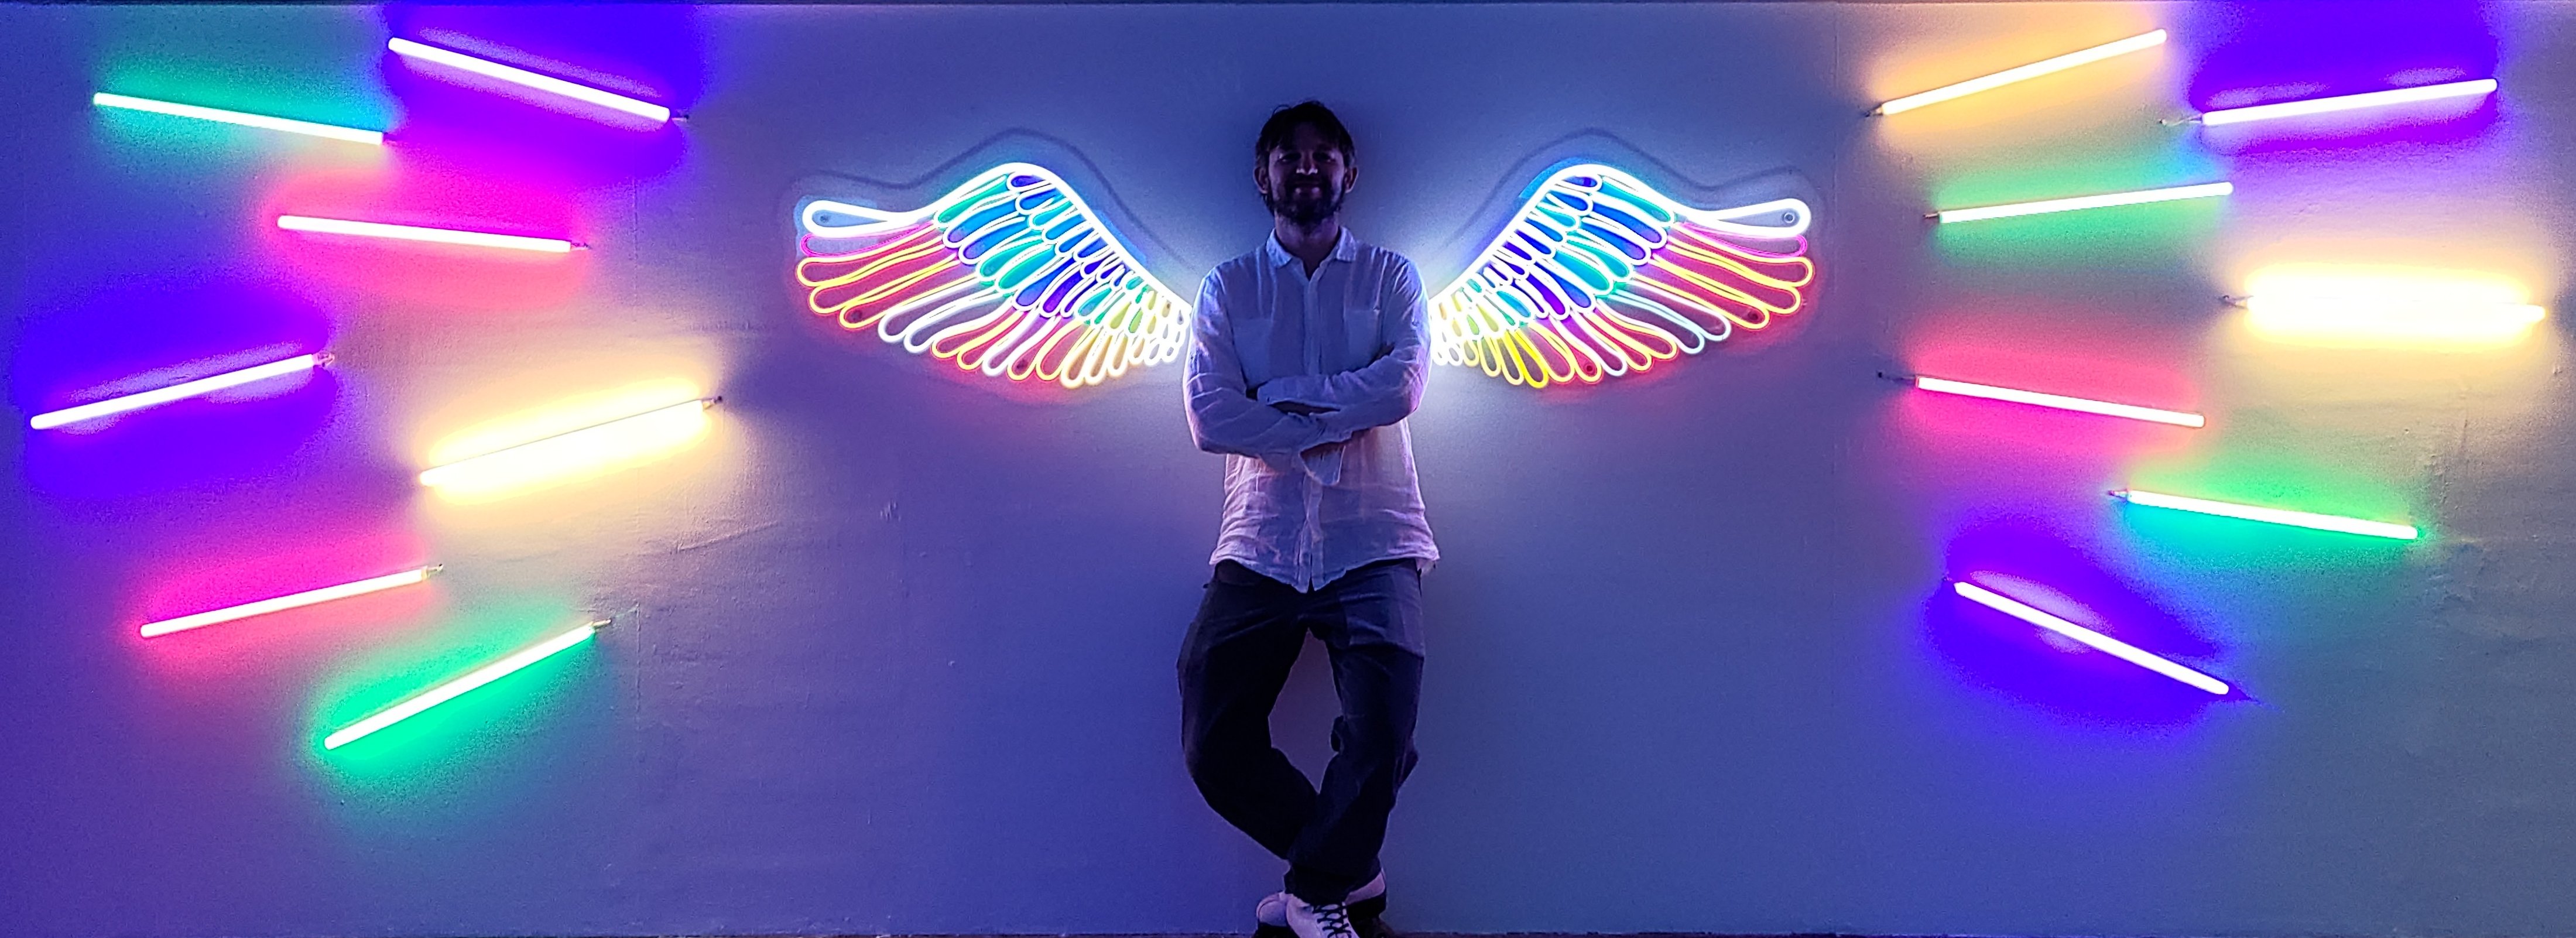 A final photo of me with electronic wings